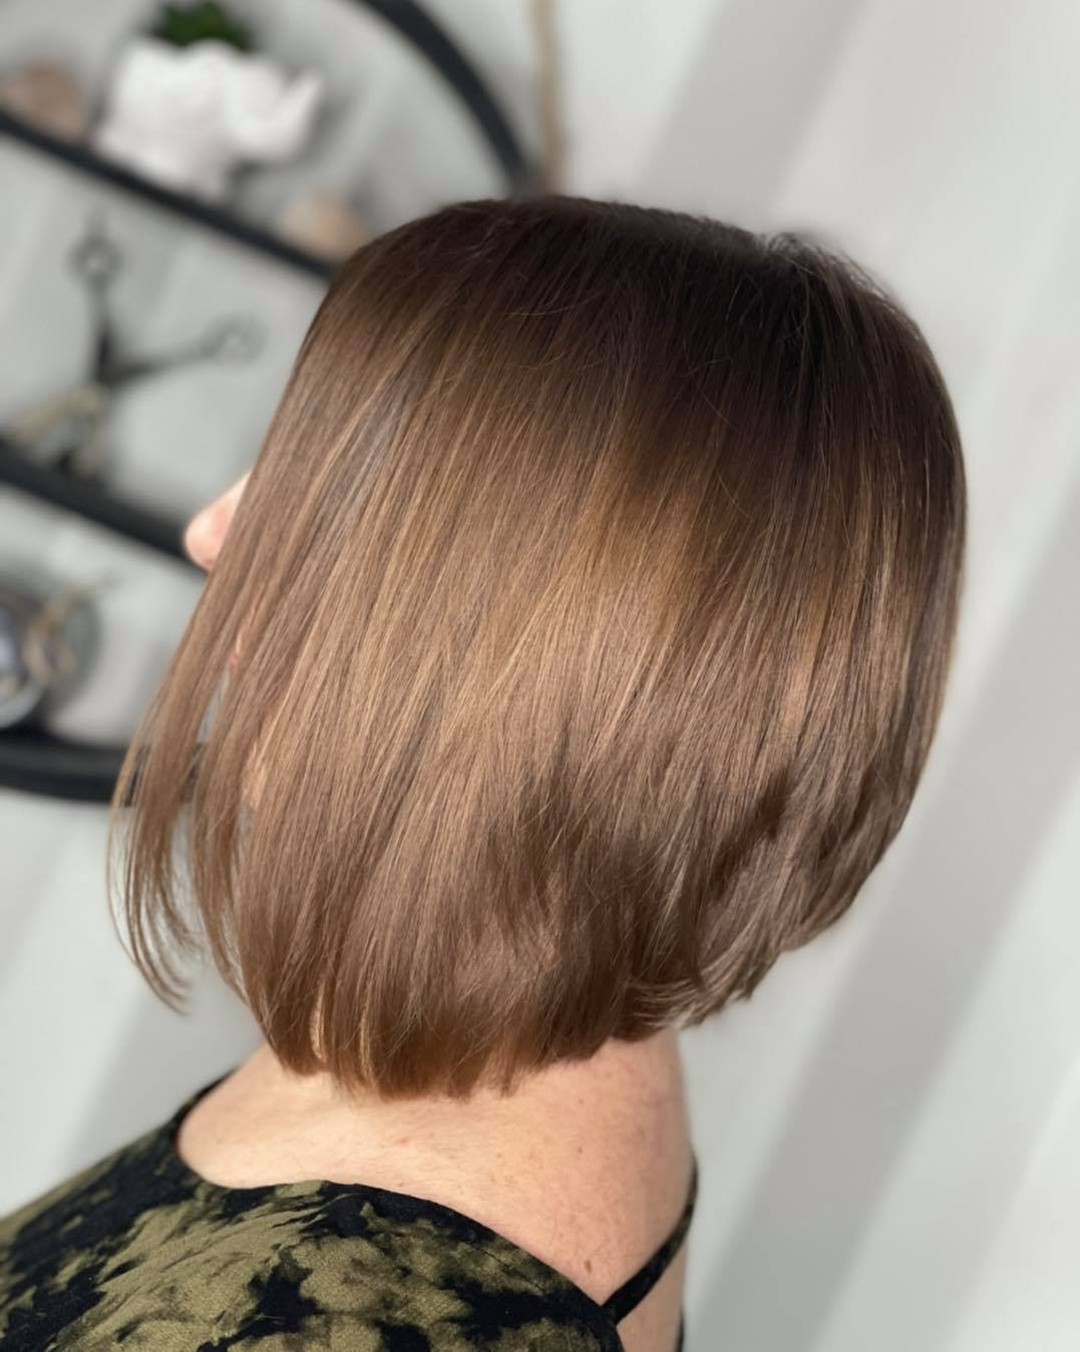 Stacked Bob 113 Long stacked bob | Medium length stacked bob | Pictures of stacked bob haircuts front and back Stacked Bob Hairstyles for Women